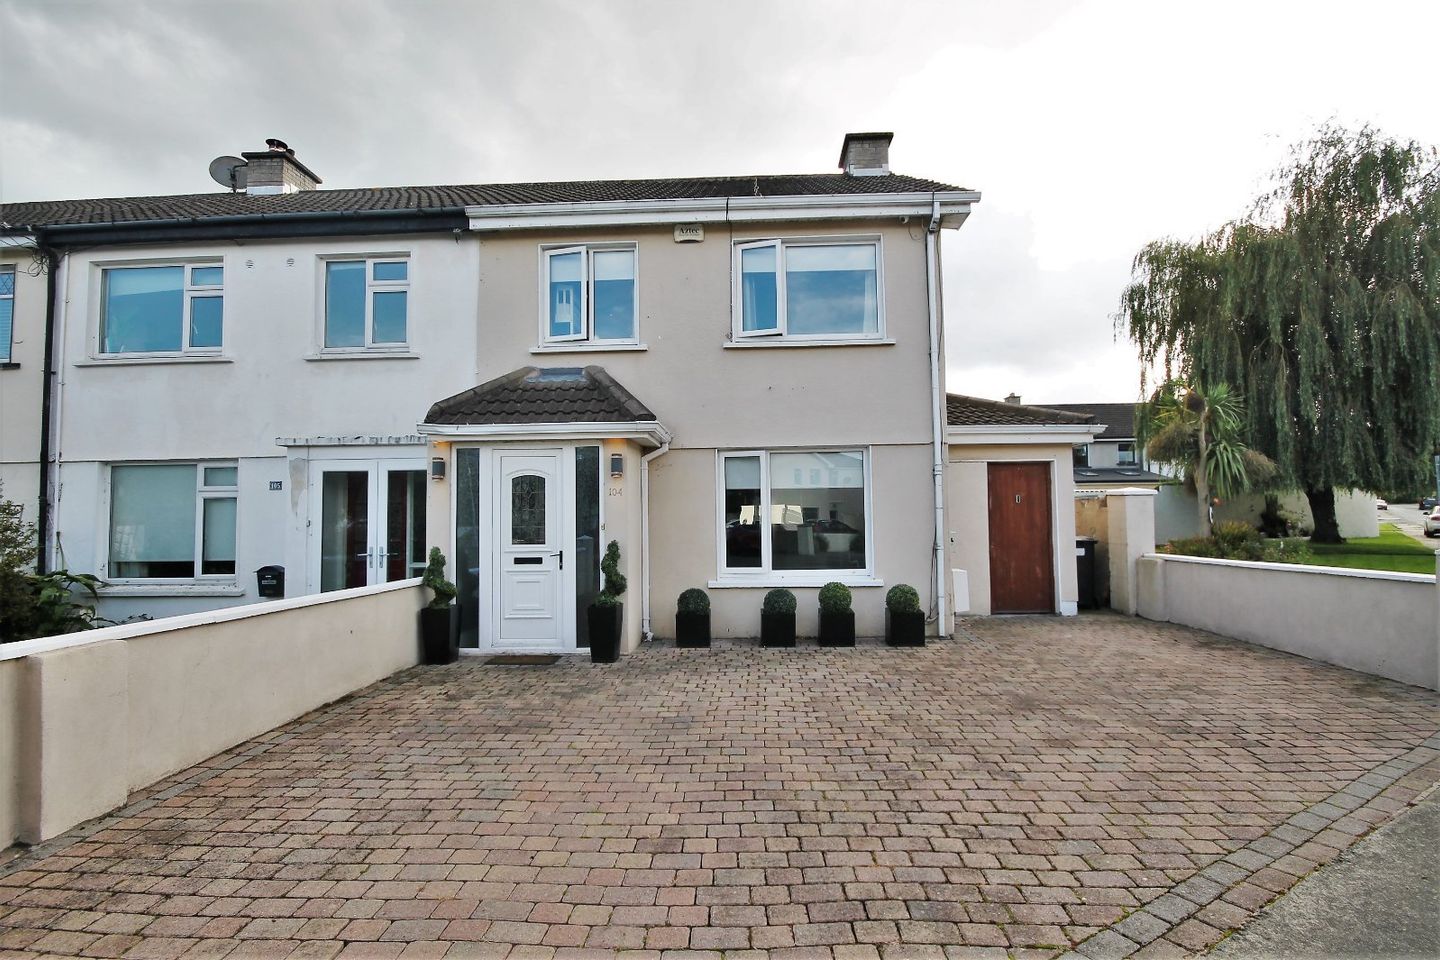 104 Mountainview Drive, Boghall Road, Bray, Co. Wicklow, A98WN24